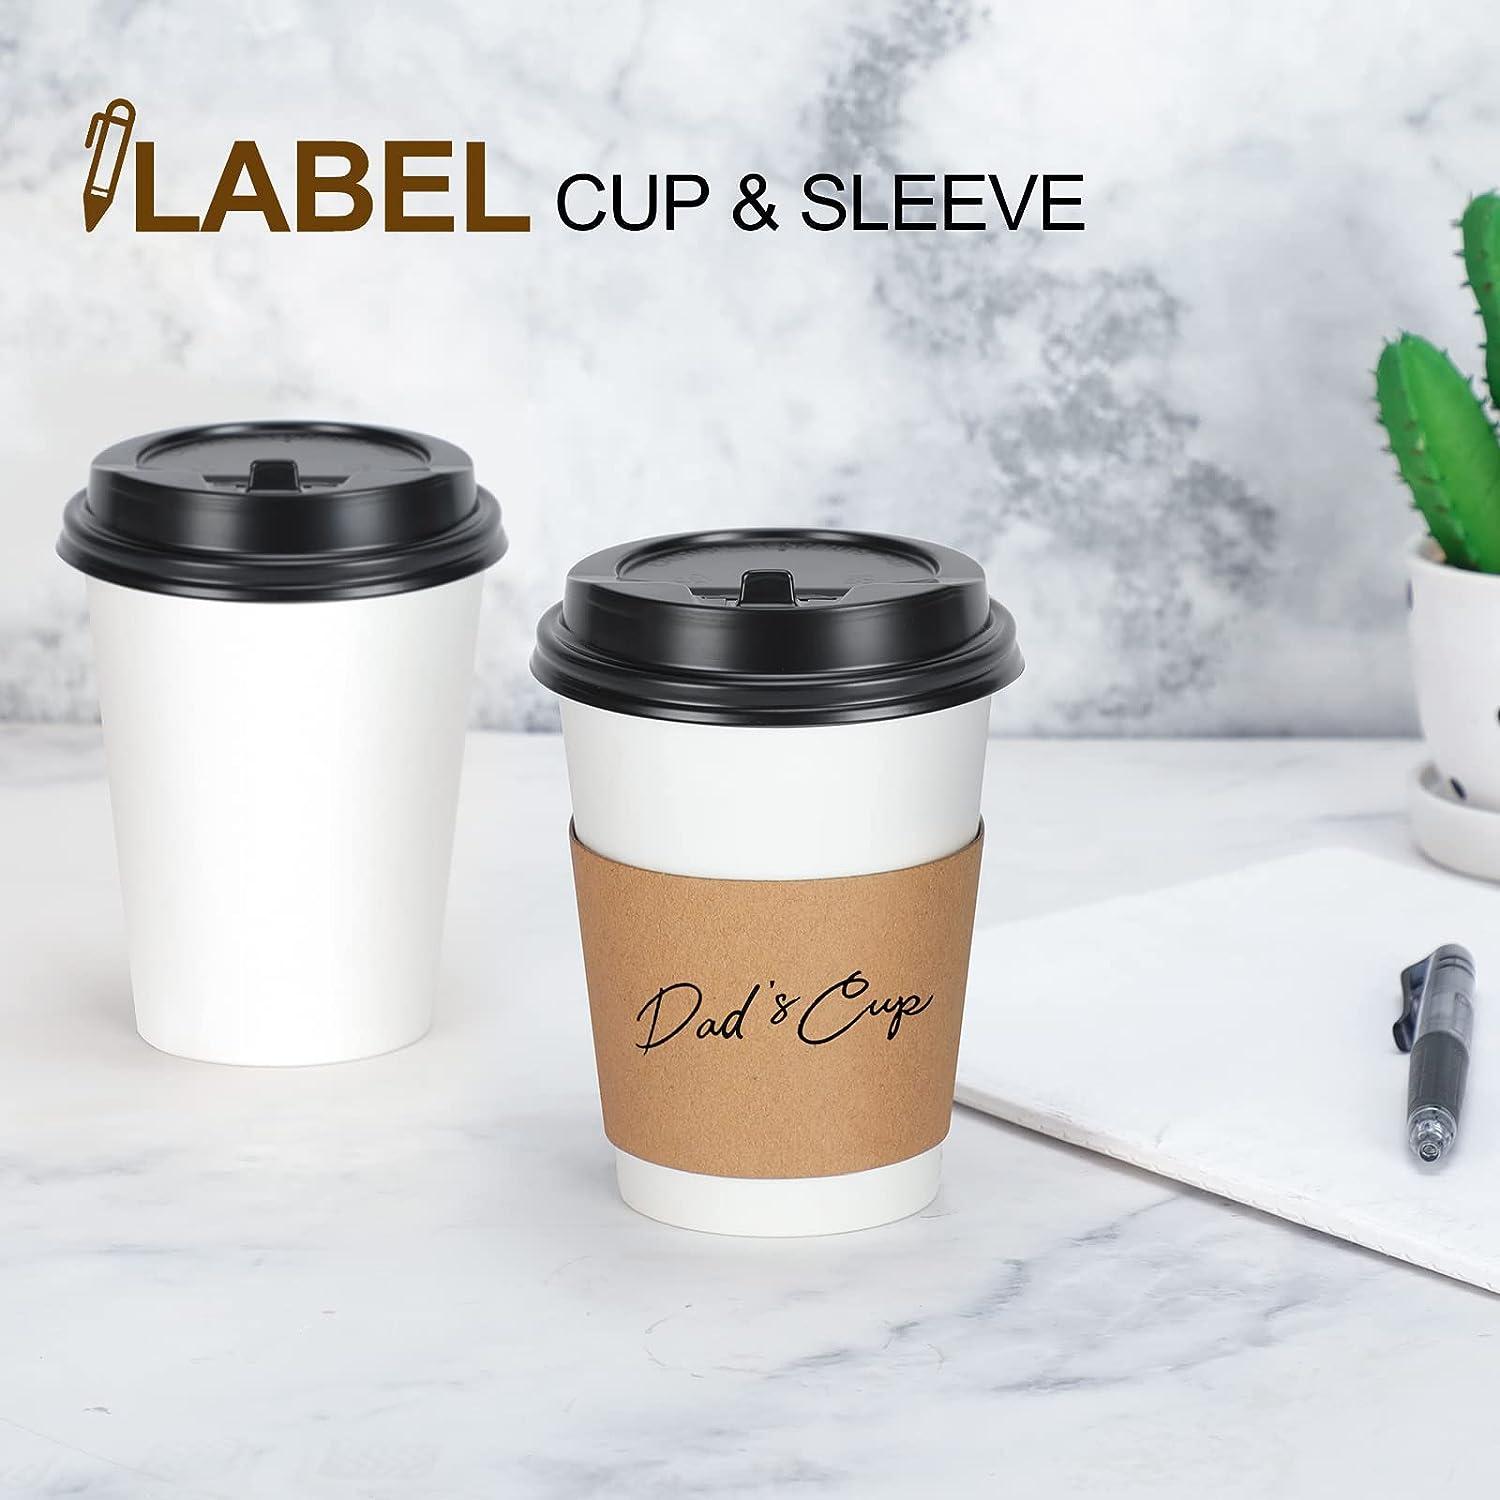 Disposable Coffee Cups with Lids 12 oz (100 Pack) - To Go Cups for Hot &  Cold Drinks, Tea, Hot Choco…See more Disposable Coffee Cups with Lids 12 oz